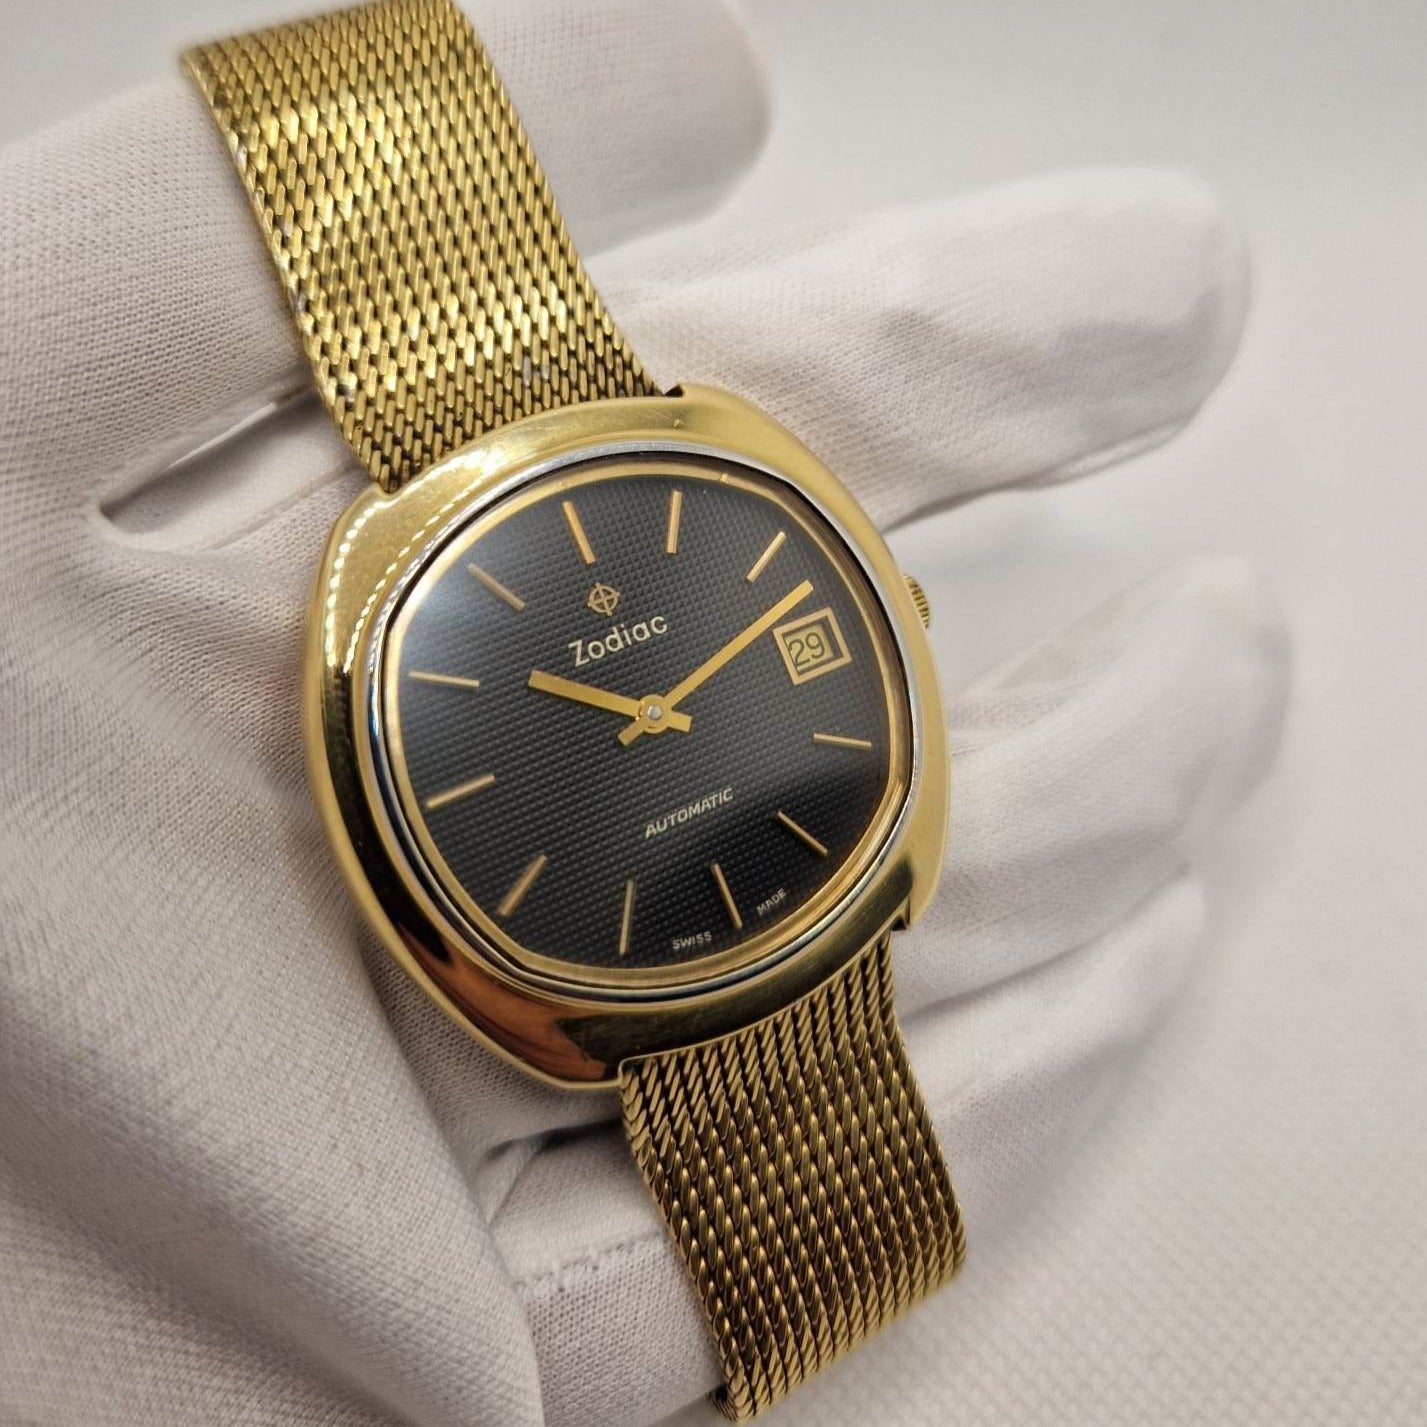 Vintage Zodiac Gold Automatic Watch, Cal. LTD 104 2892, Tapisserie Dial, Swiss-made 1960s, 21 Jewels, Black Dial, Gold-plated, Oval Case, Dress/Formal